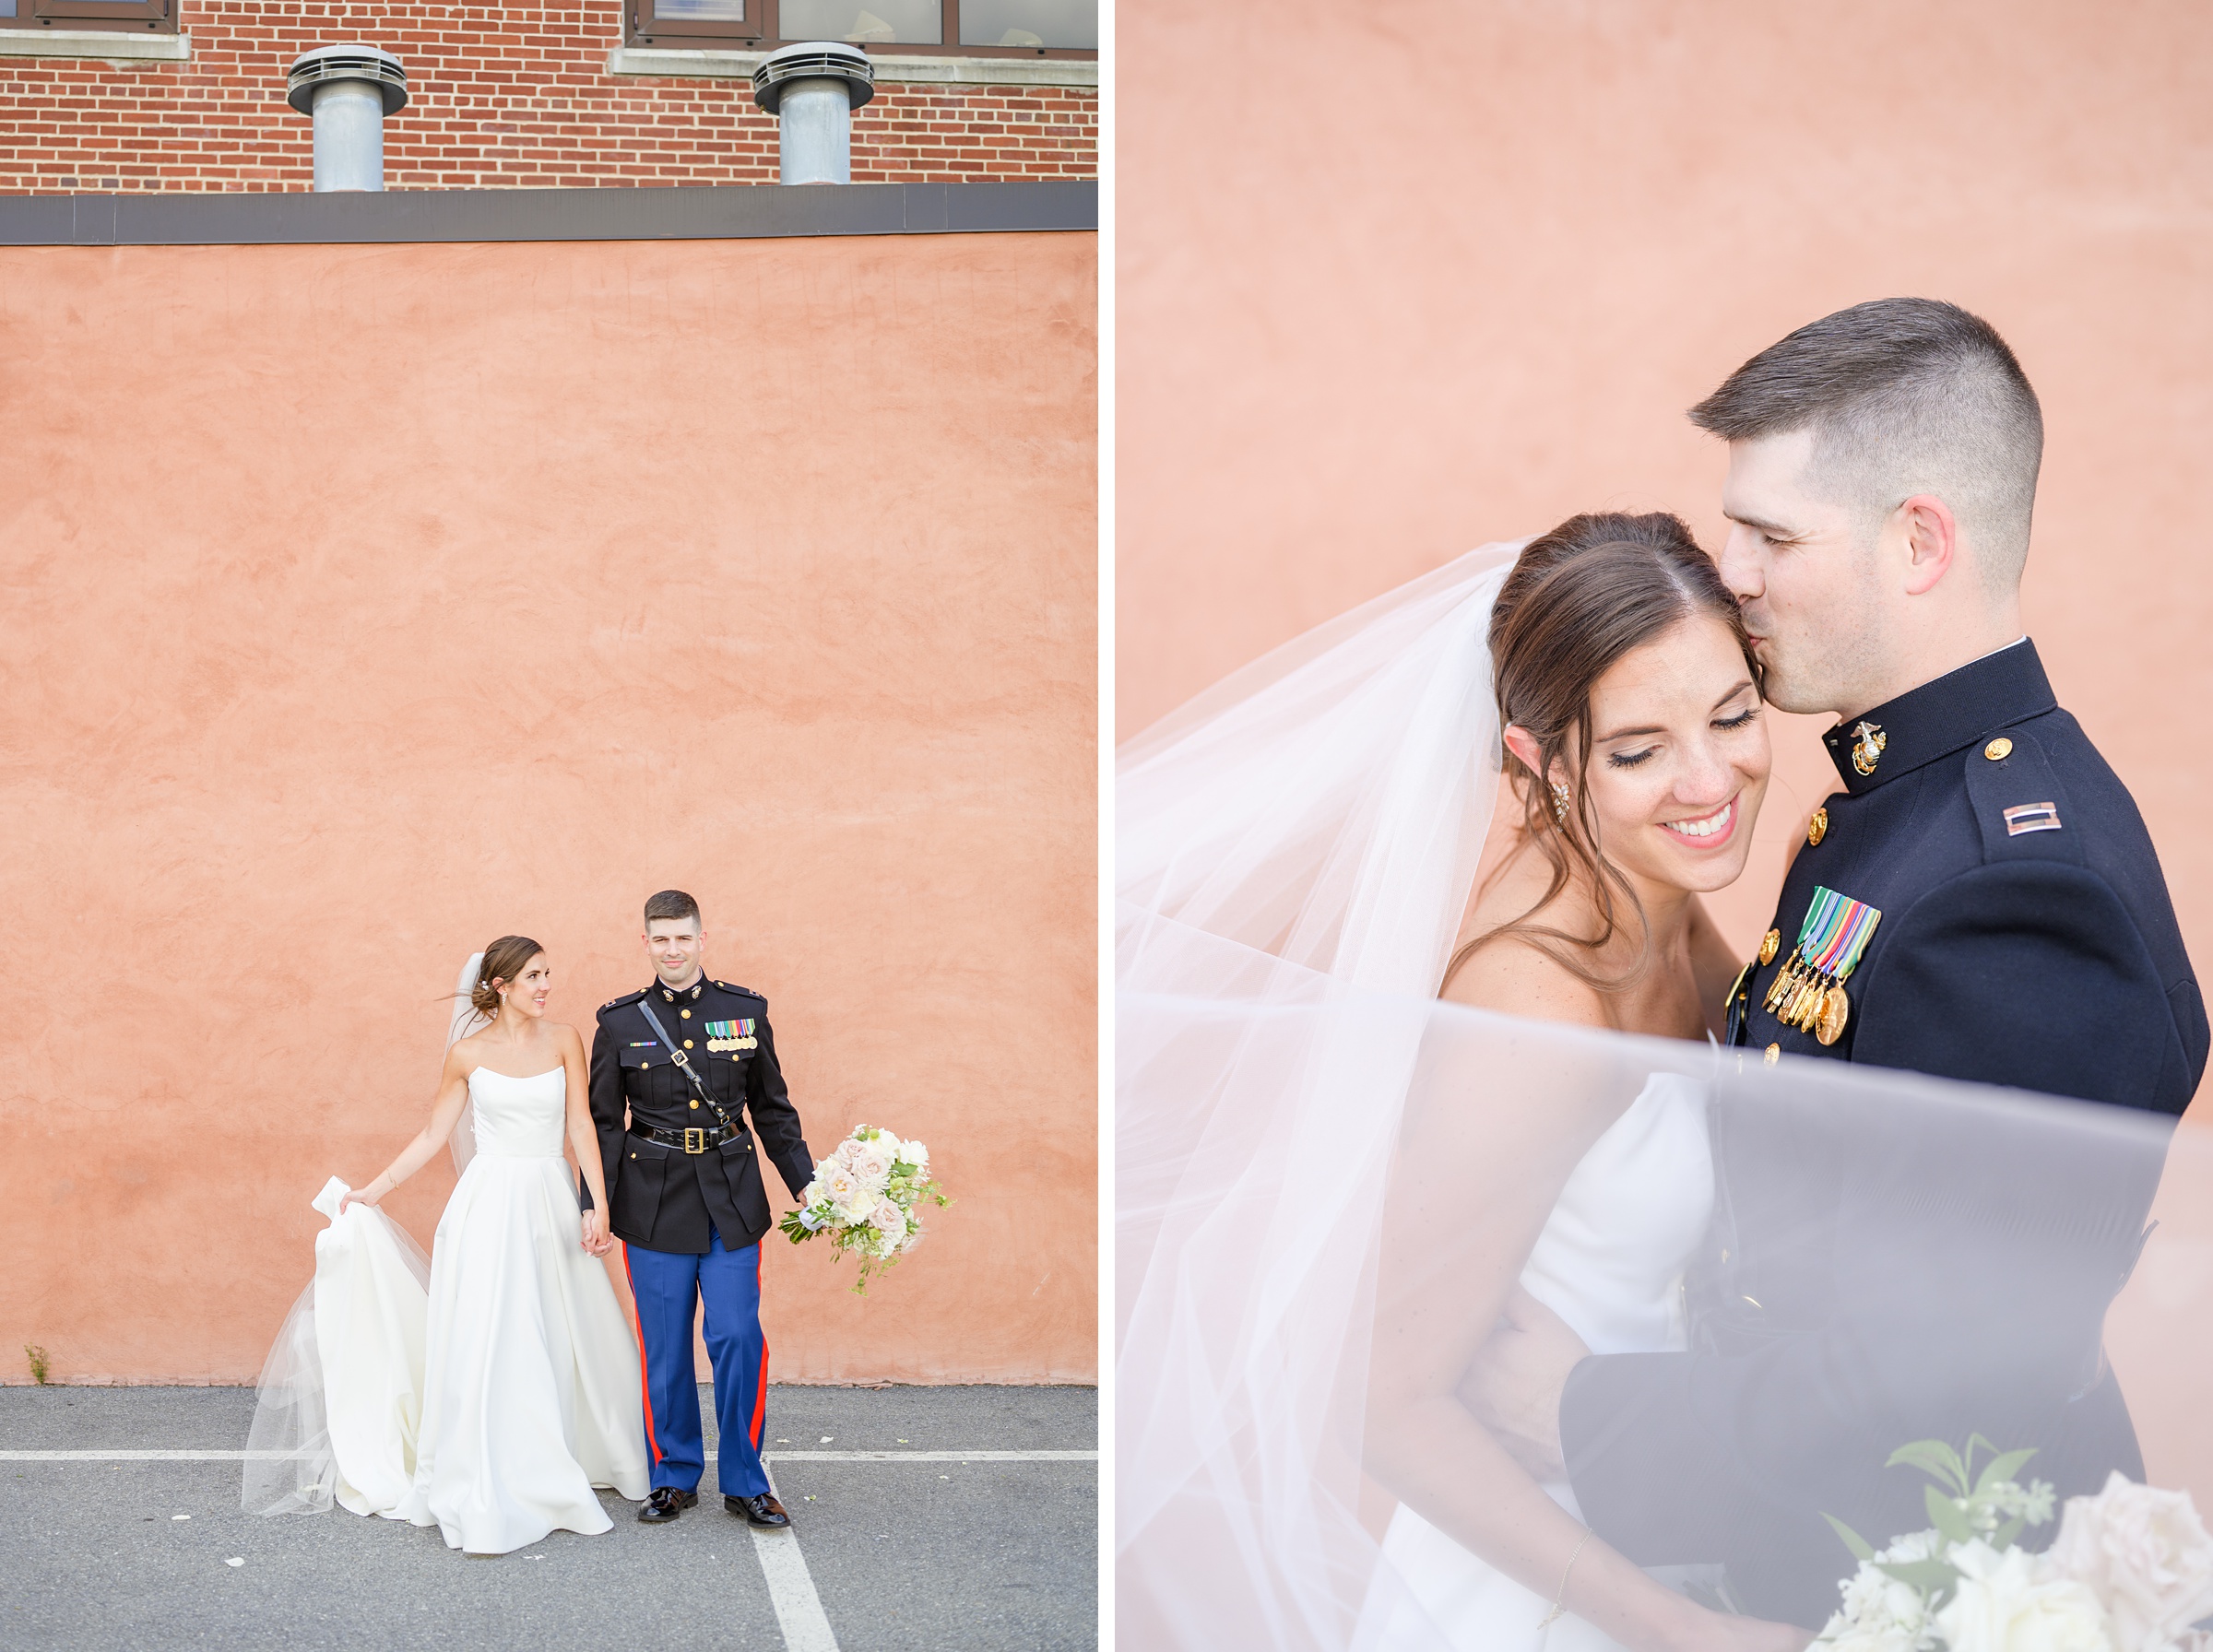 Neutral and Elegant summer wedding day at the Cork Factory Hotel in Lancaster, Pennsylvania Photographed by Baltimore Wedding Photographer Cait Kramer Photography